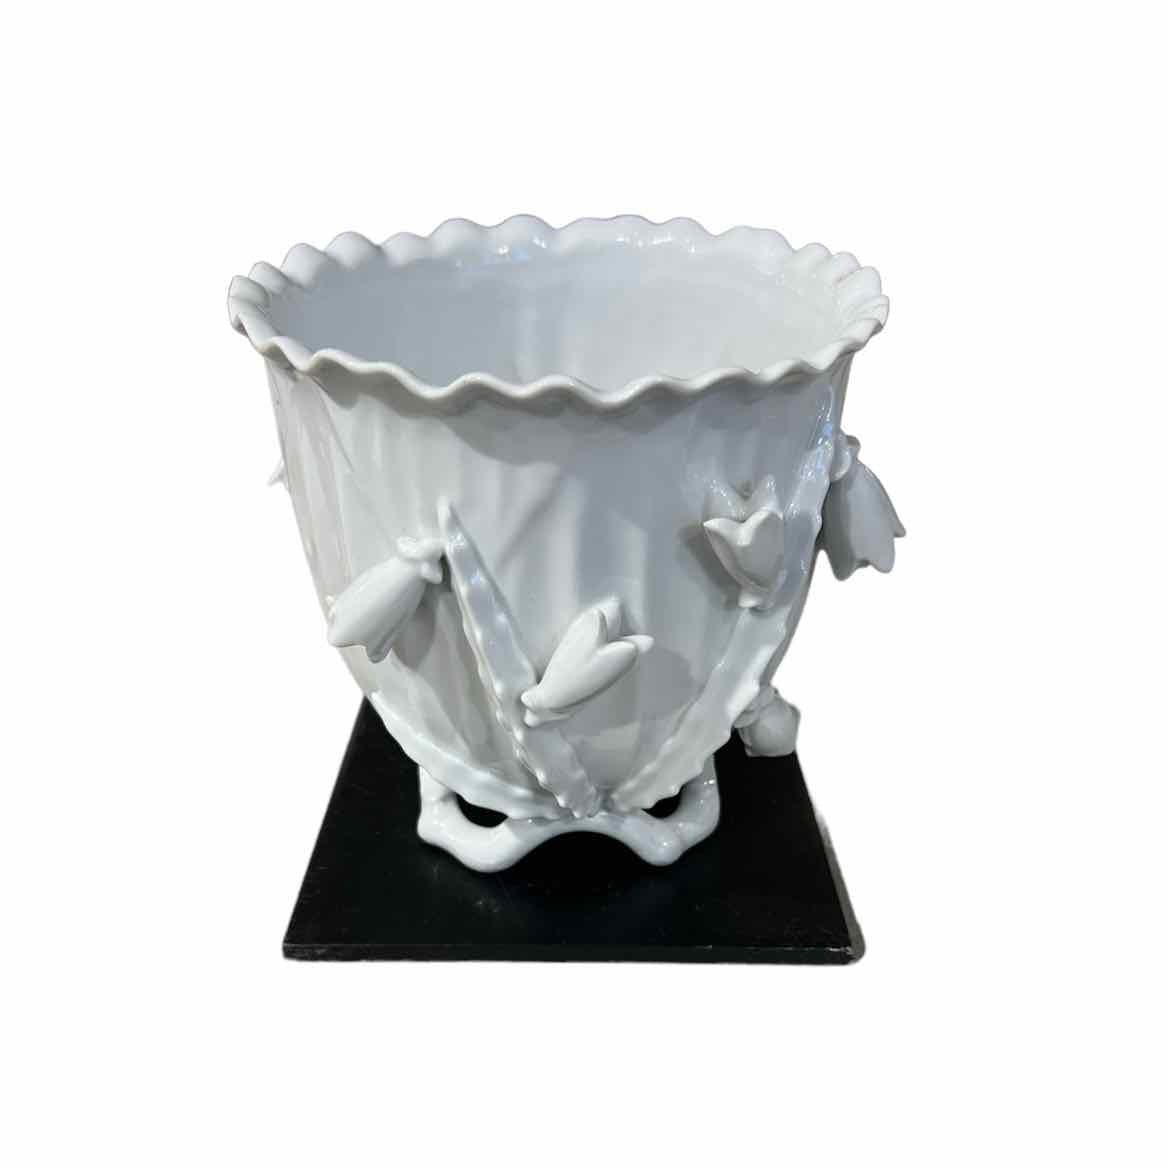 Scalloped Porcelain Cactus Flower Jardiniere with Black Tile Stand - colletteconsignment.com